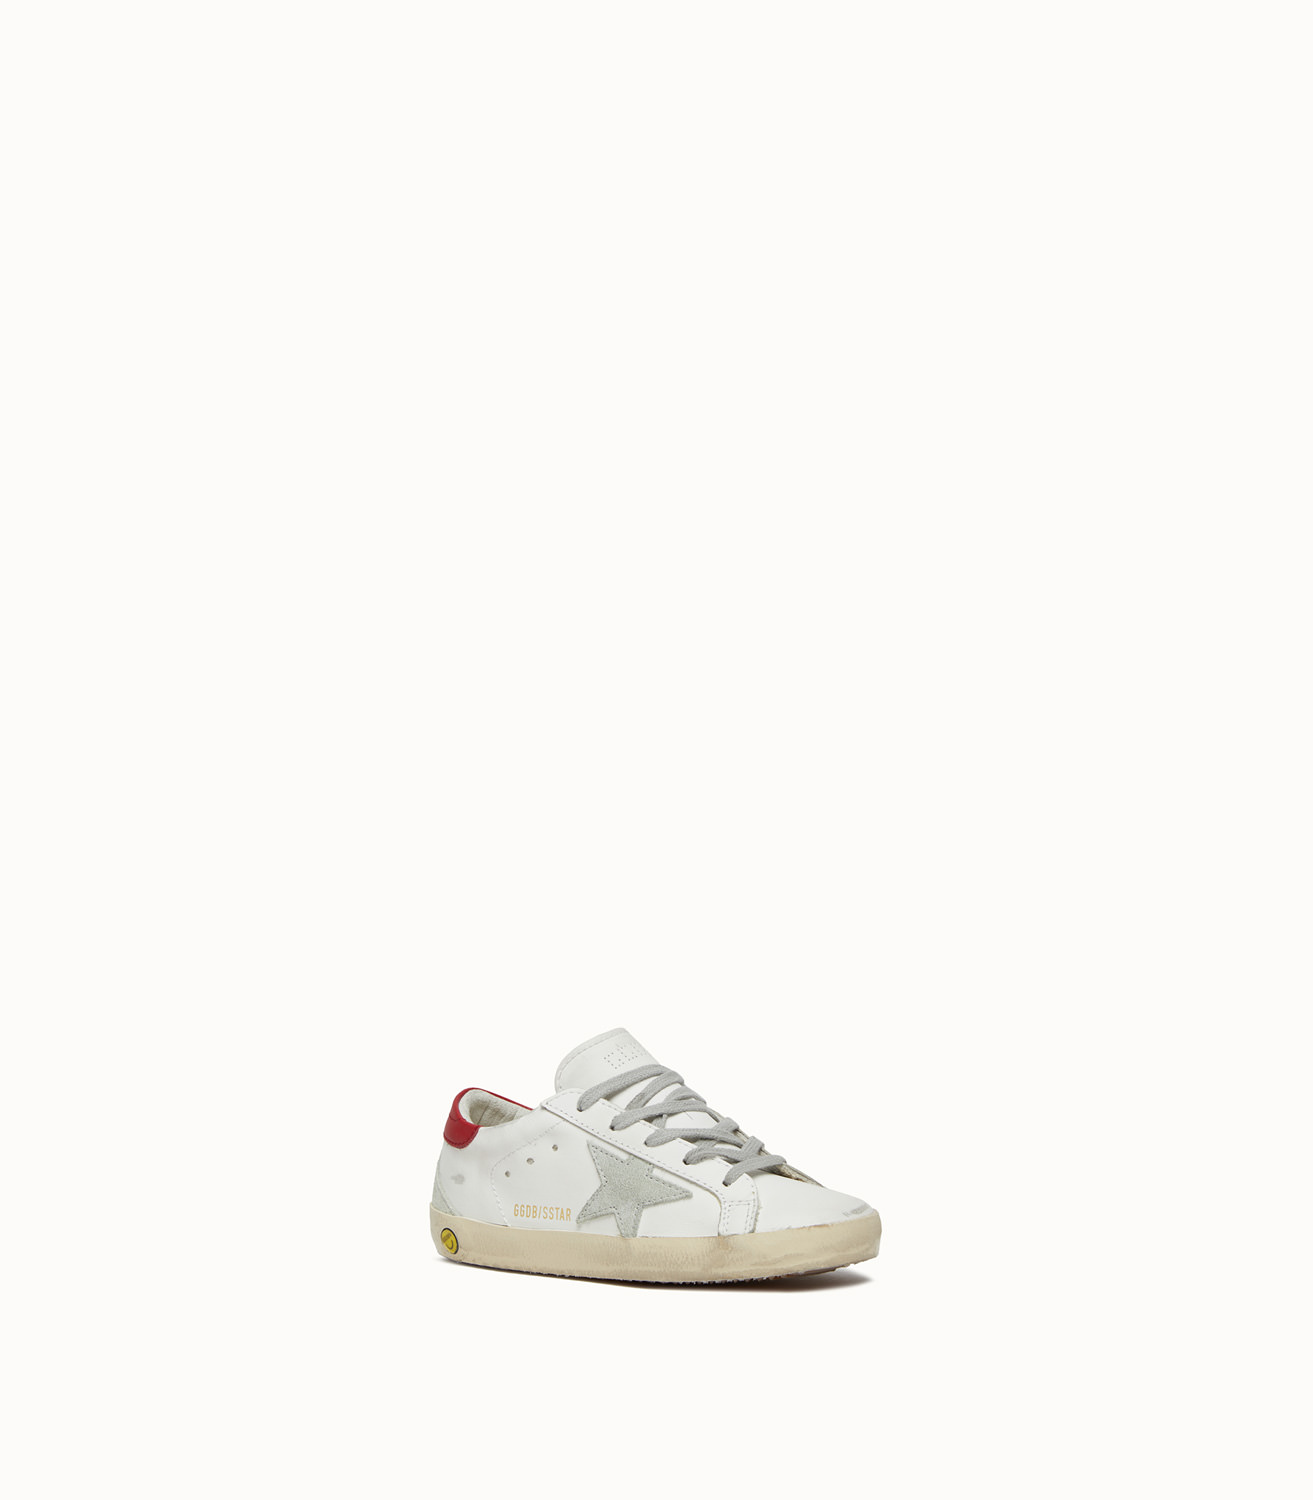 GOLDEN GOOSE DELUXE BRAND GOOSE SUPER COLOR WHI